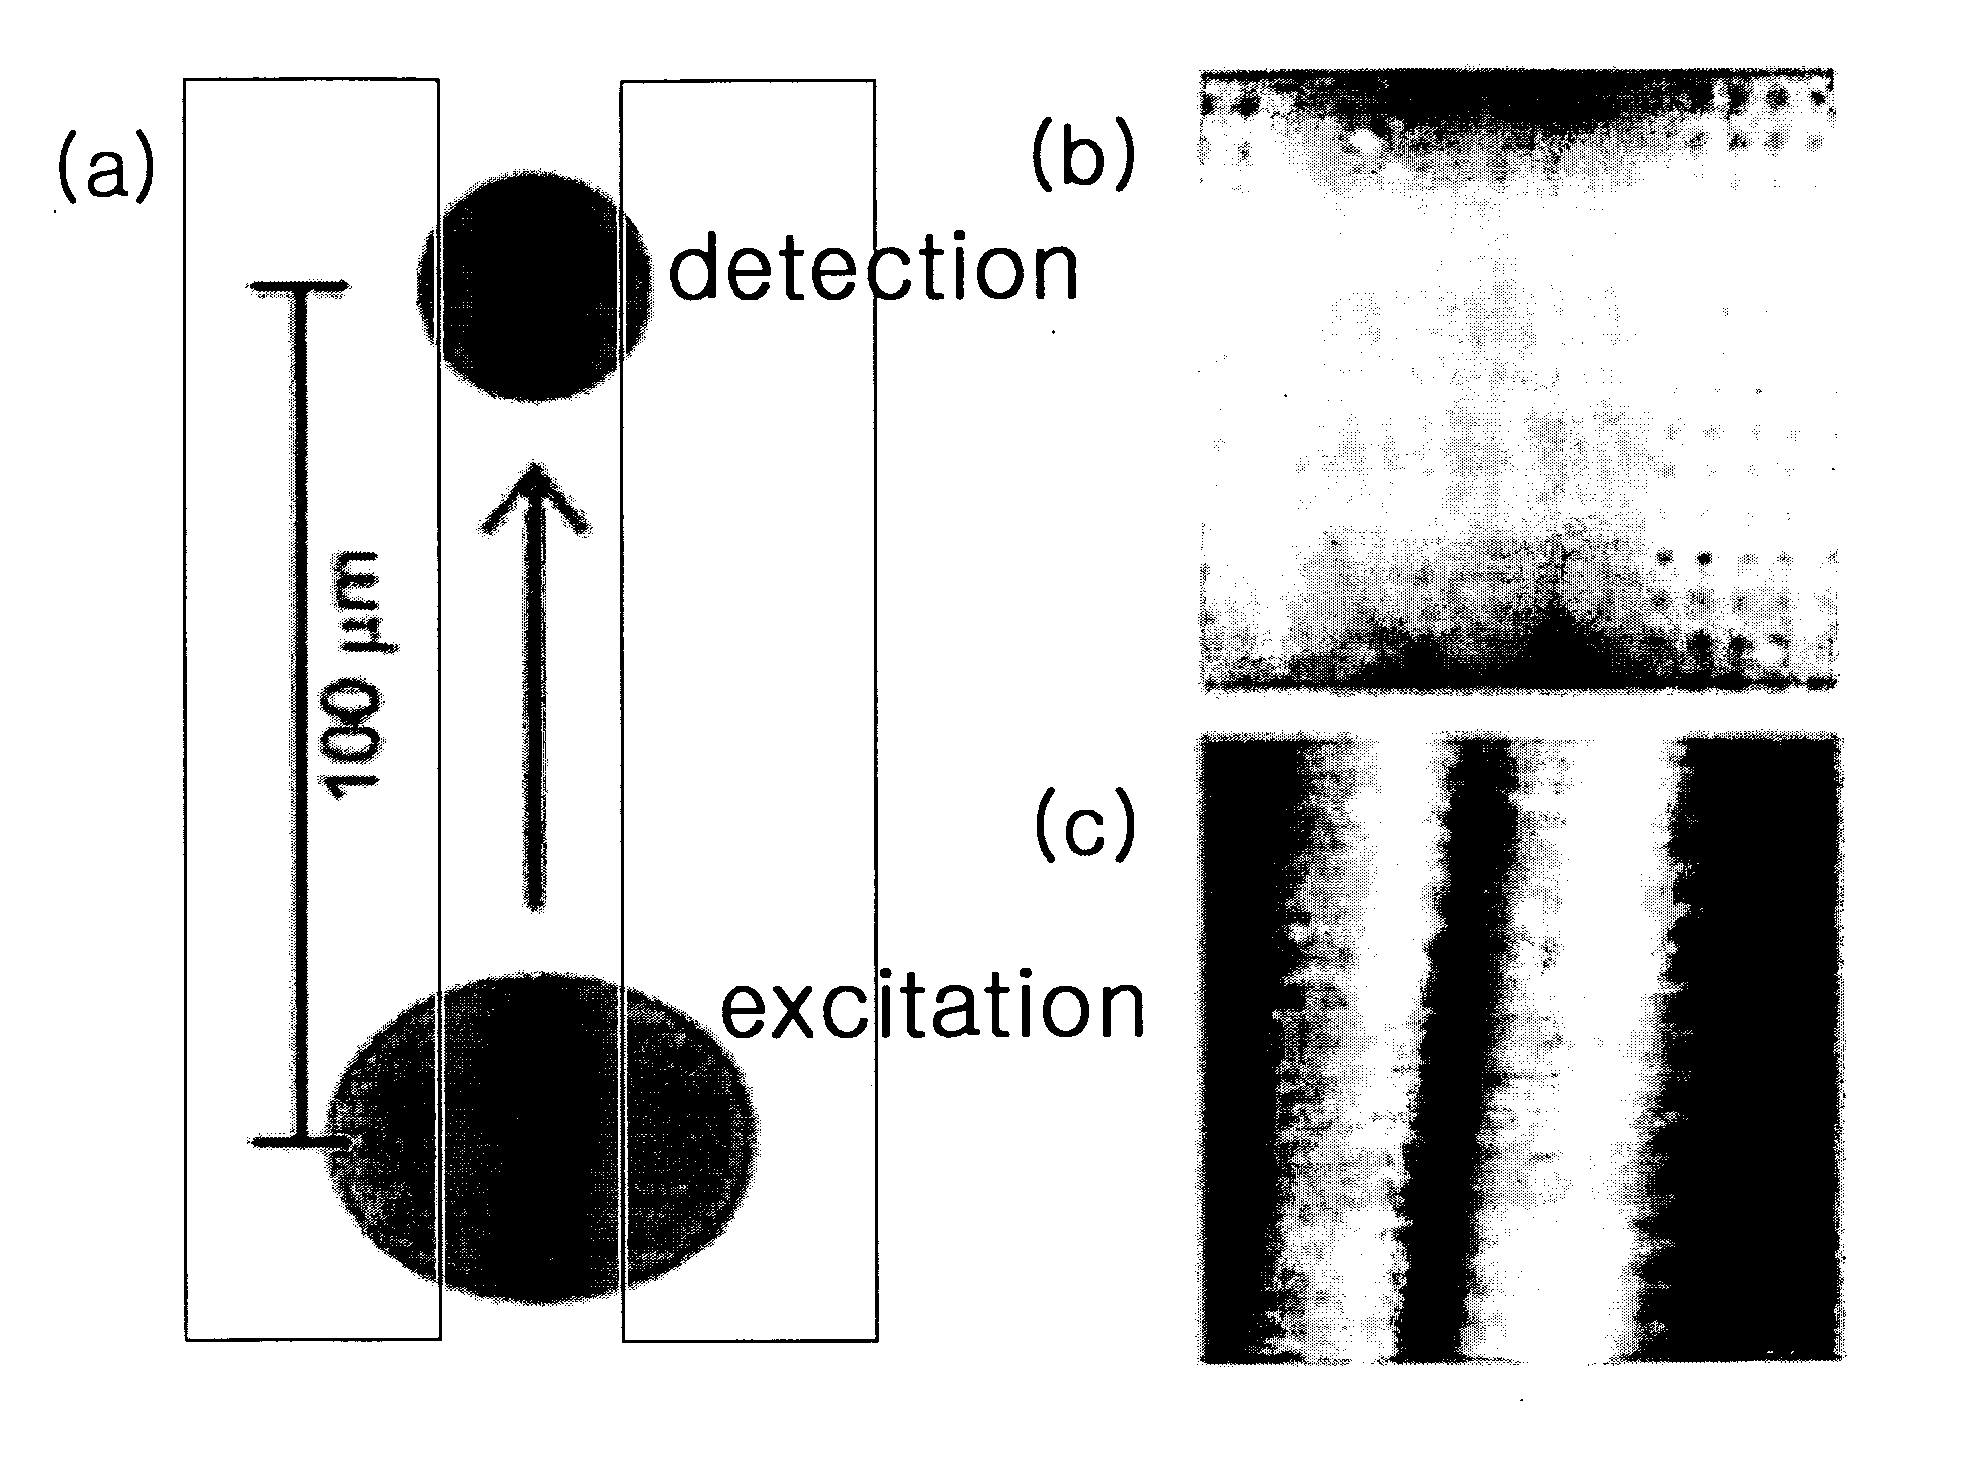 Surface plasmon optic devices and radiating surface plasmon sources for photolithography